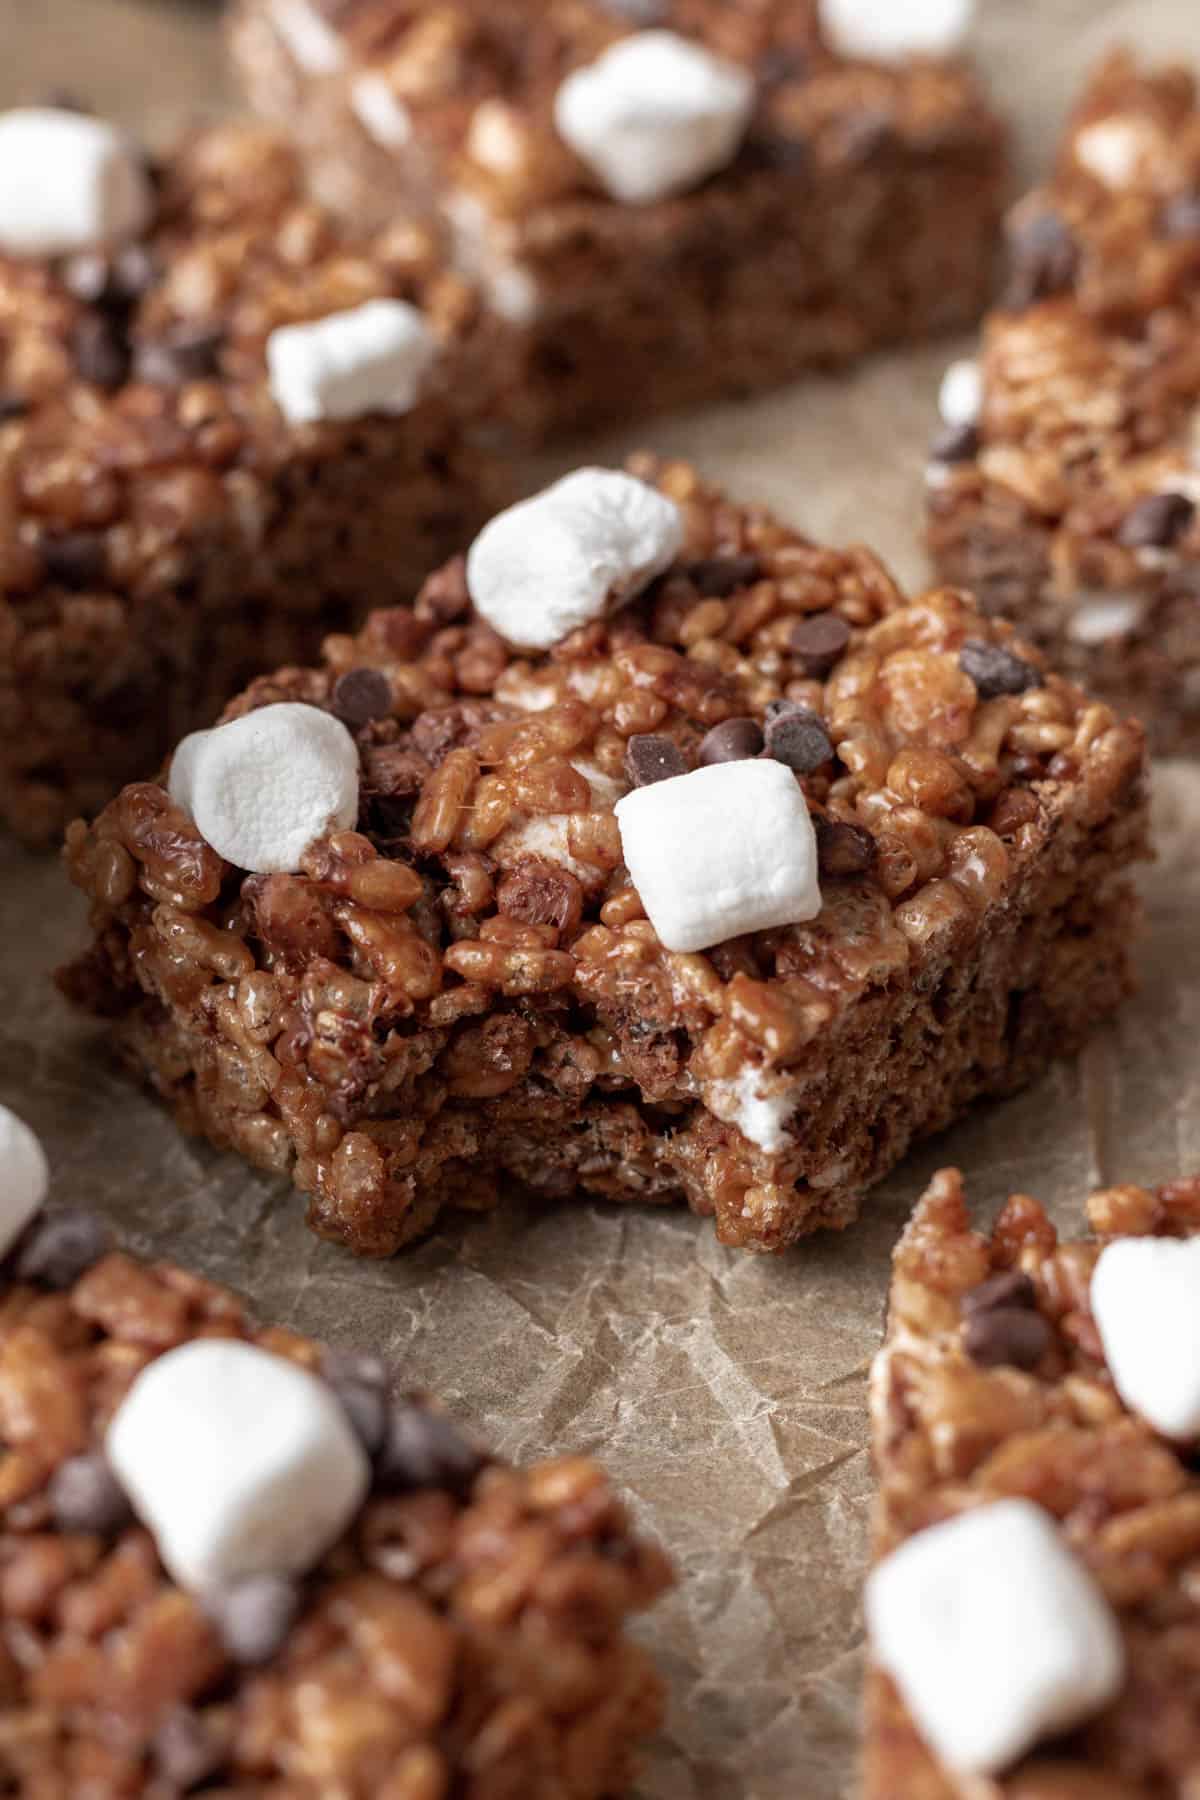 A cocoa rice krispie treat topped with marshmallows and chocolate chips with a bite taken out.